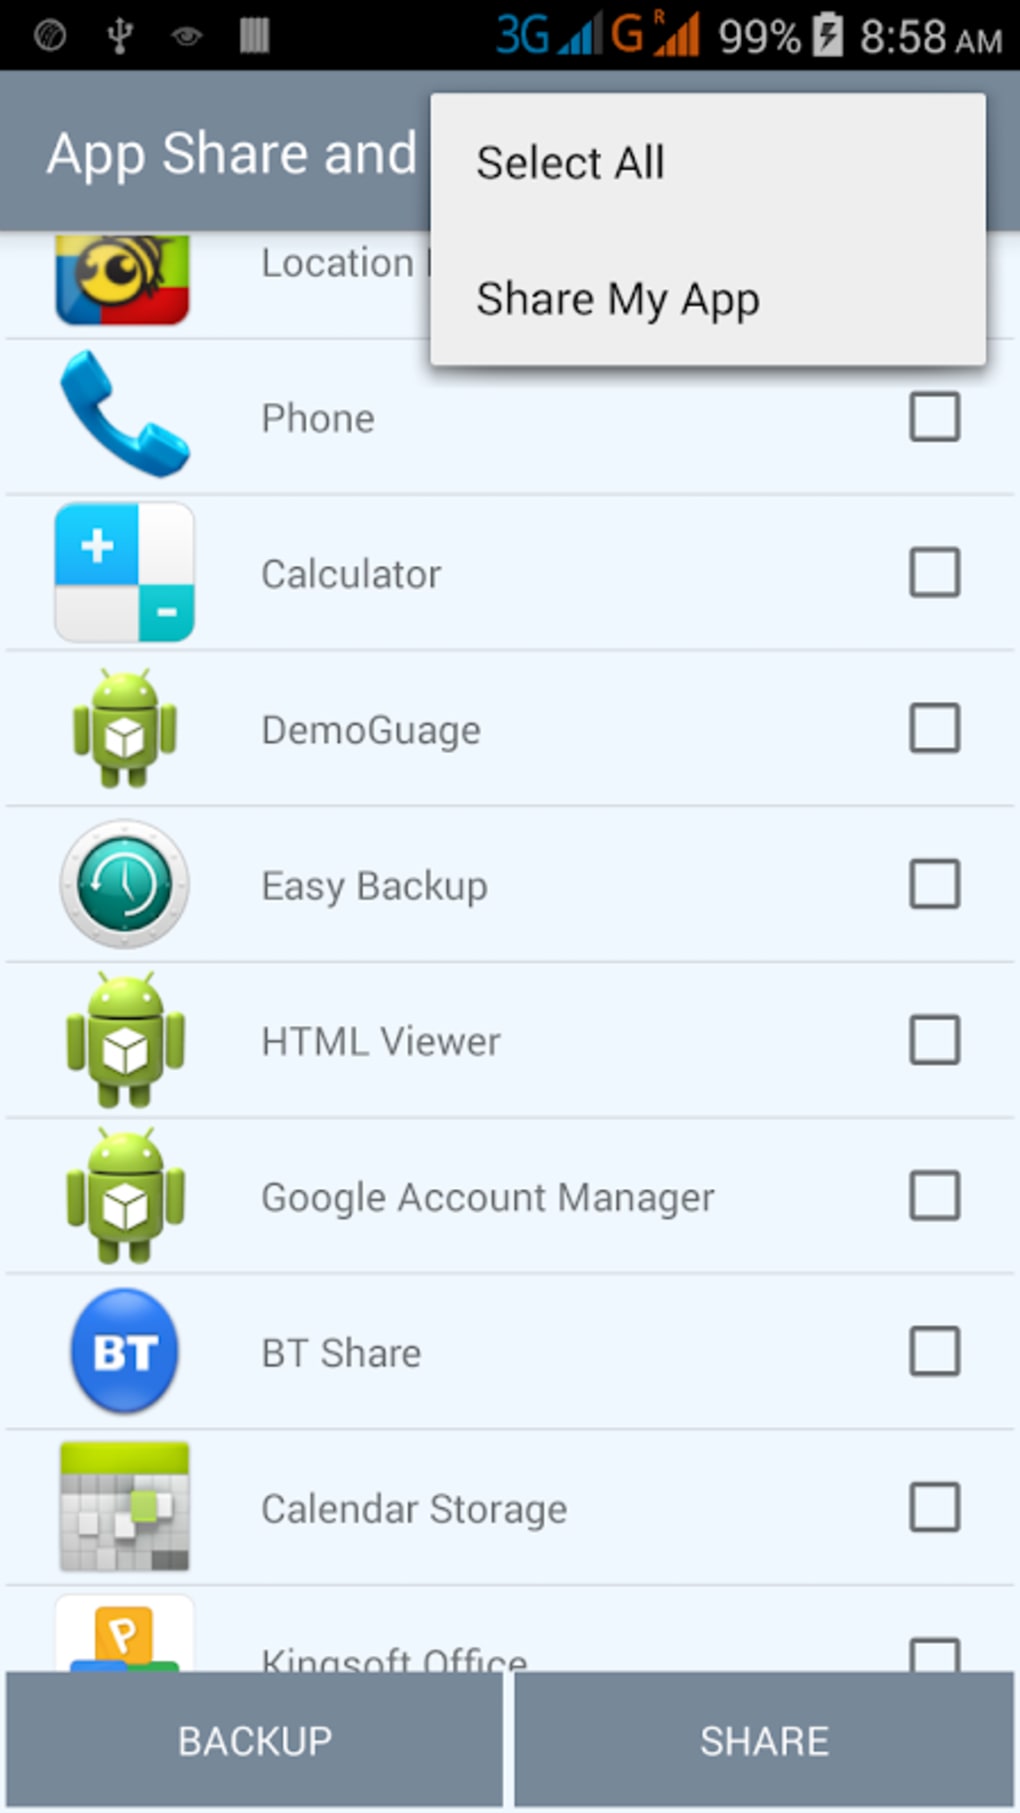 APPSHARE. Share app. Android Backup APK. Share apps инструкция на русском языке.